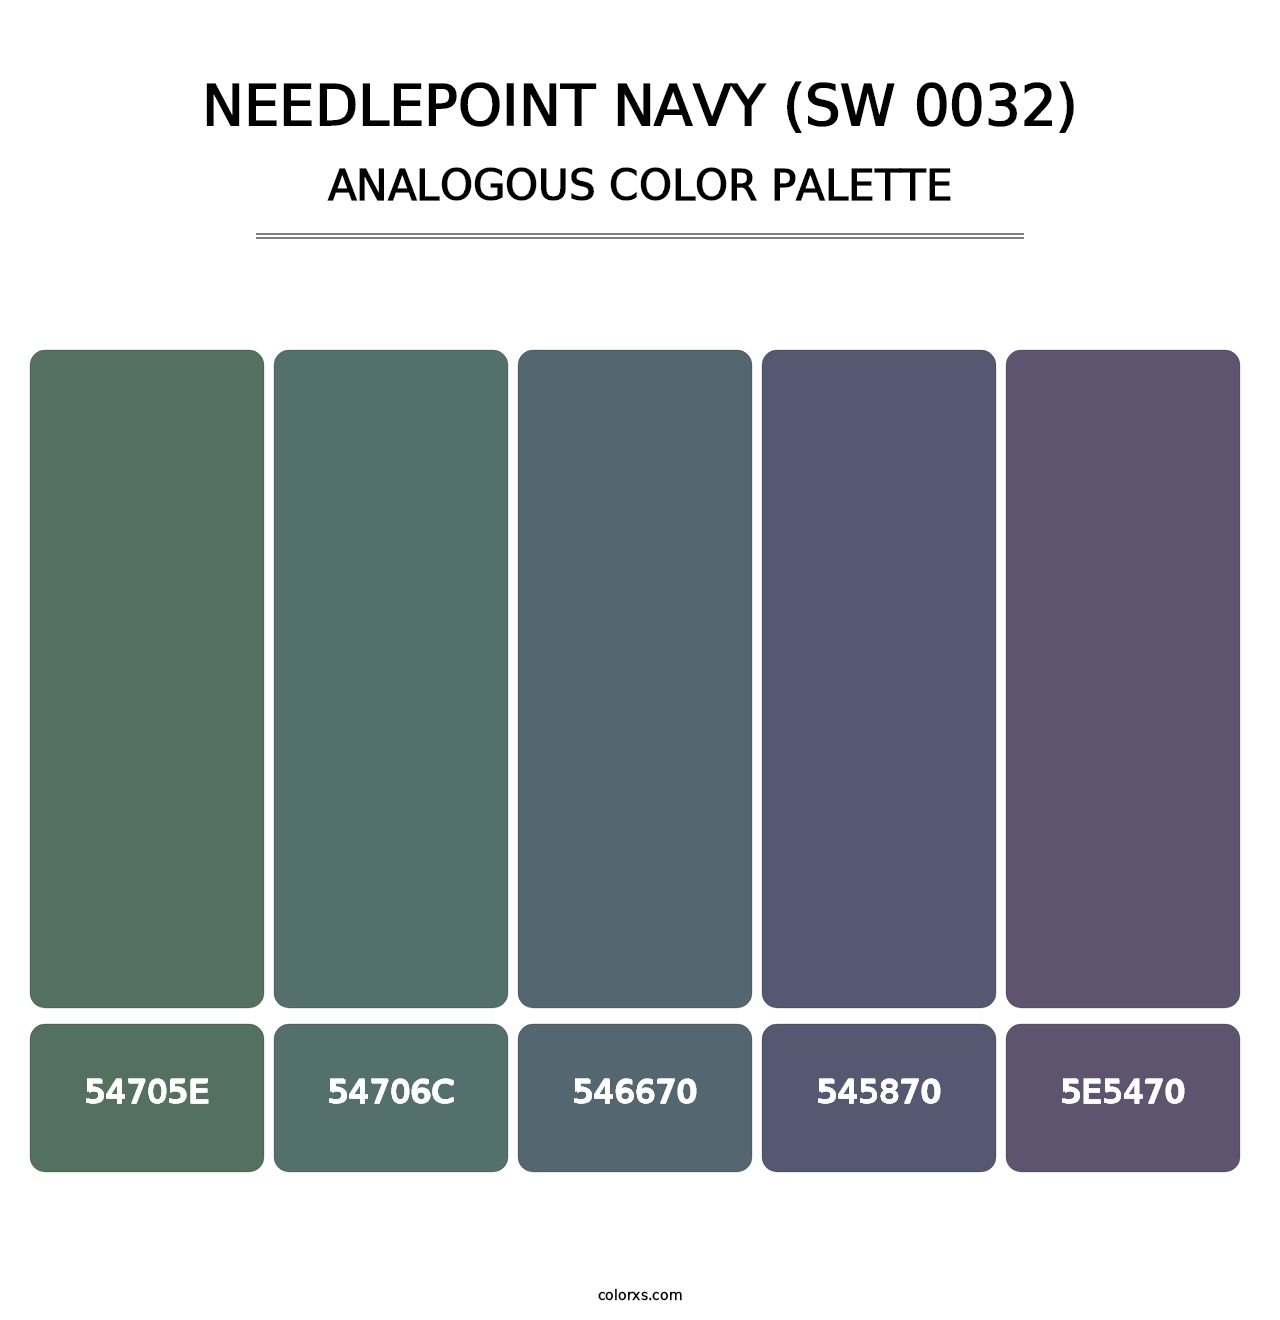 Needlepoint Navy (SW 0032) - Analogous Color Palette